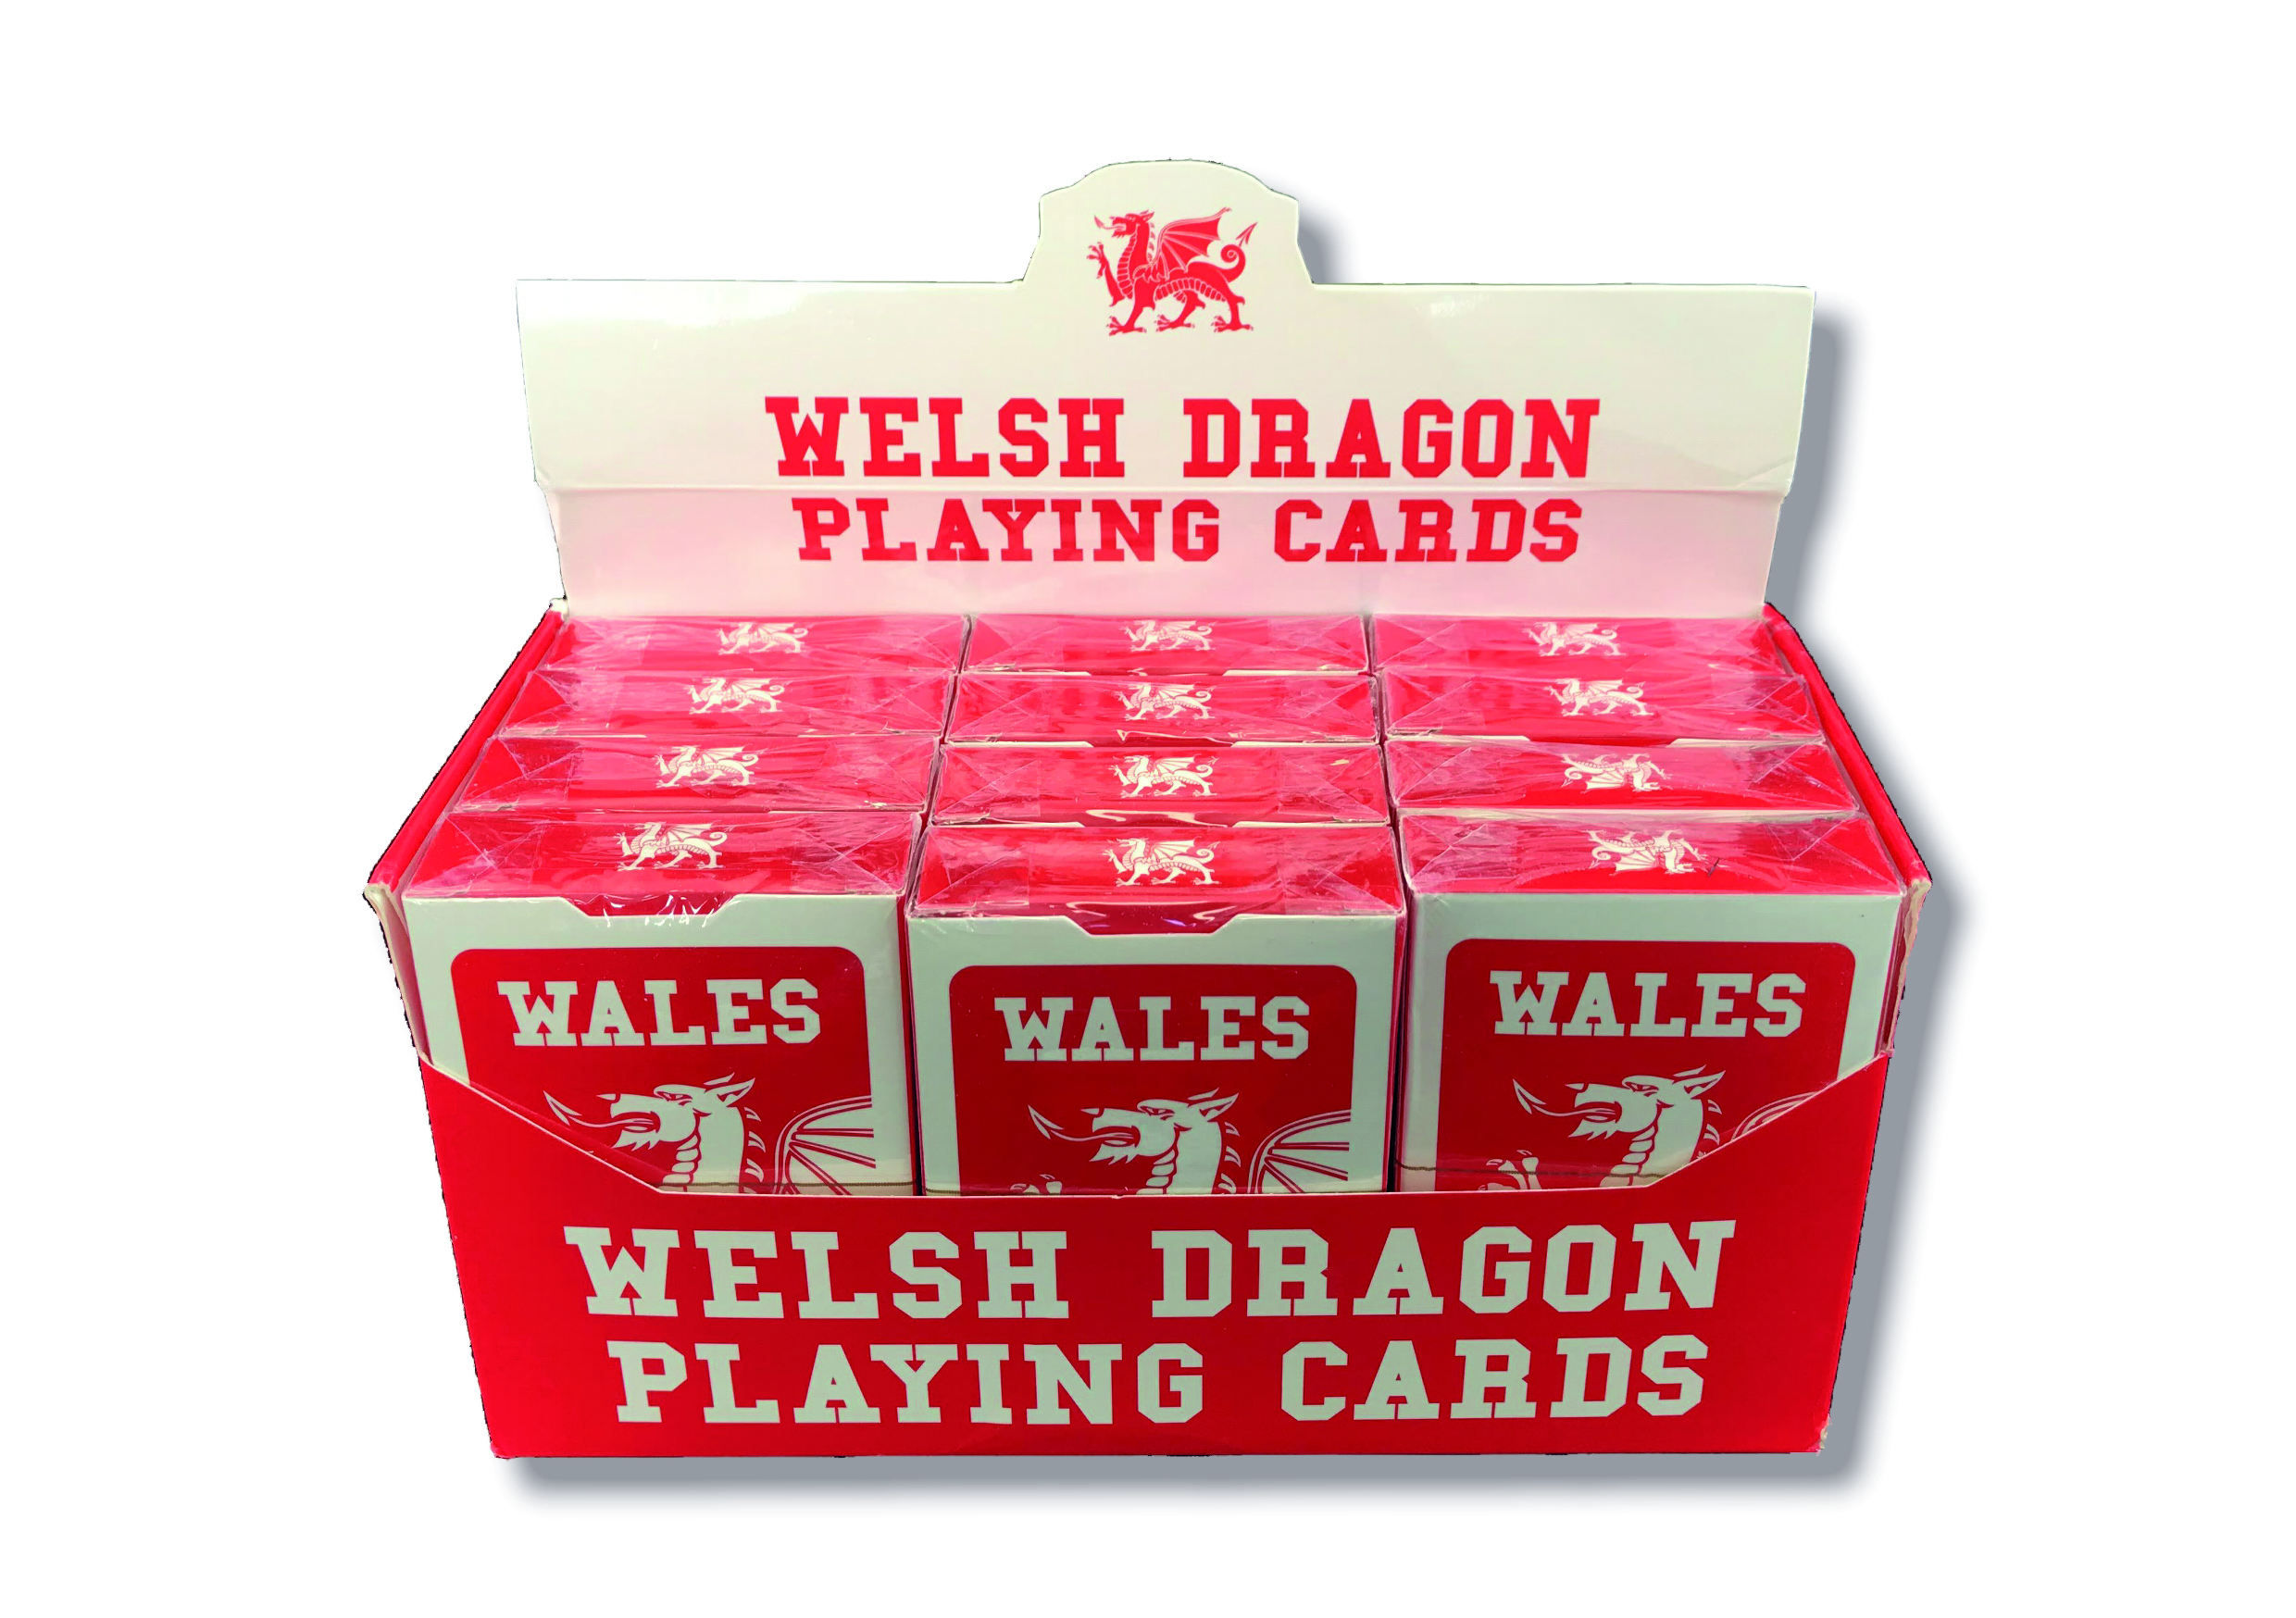 Welsh Dragon Playing Cards in display box